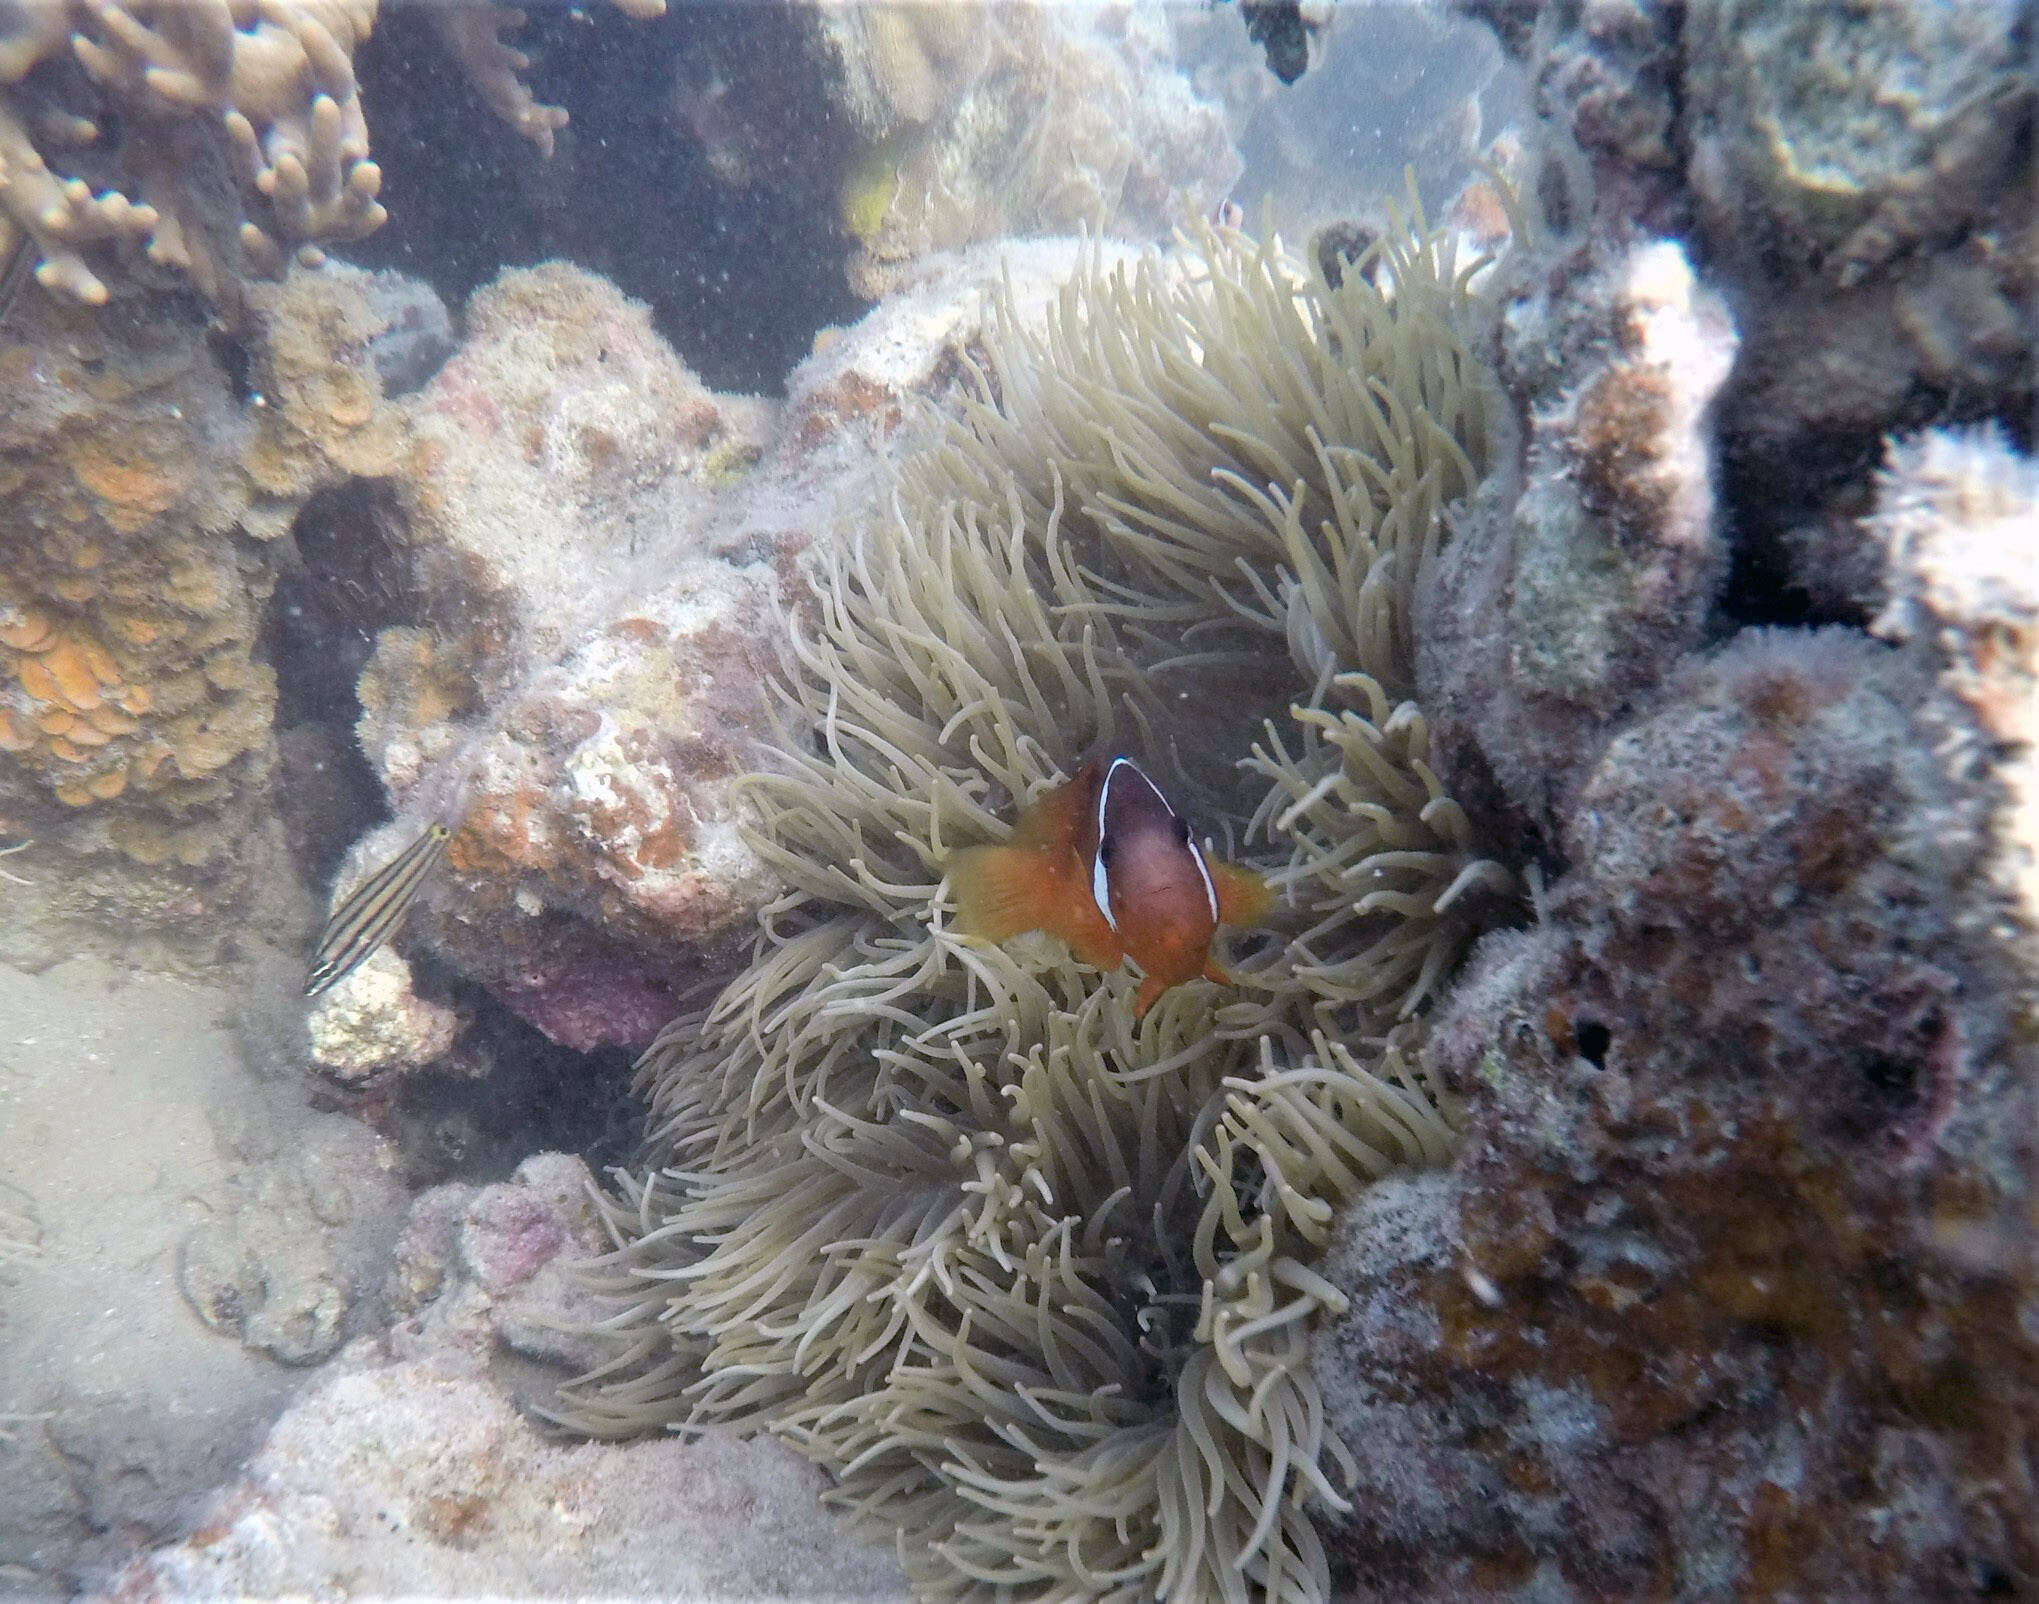 A Barberi clownfish staring up from its anemone home. (Photo by Mark Laker/USFWS)